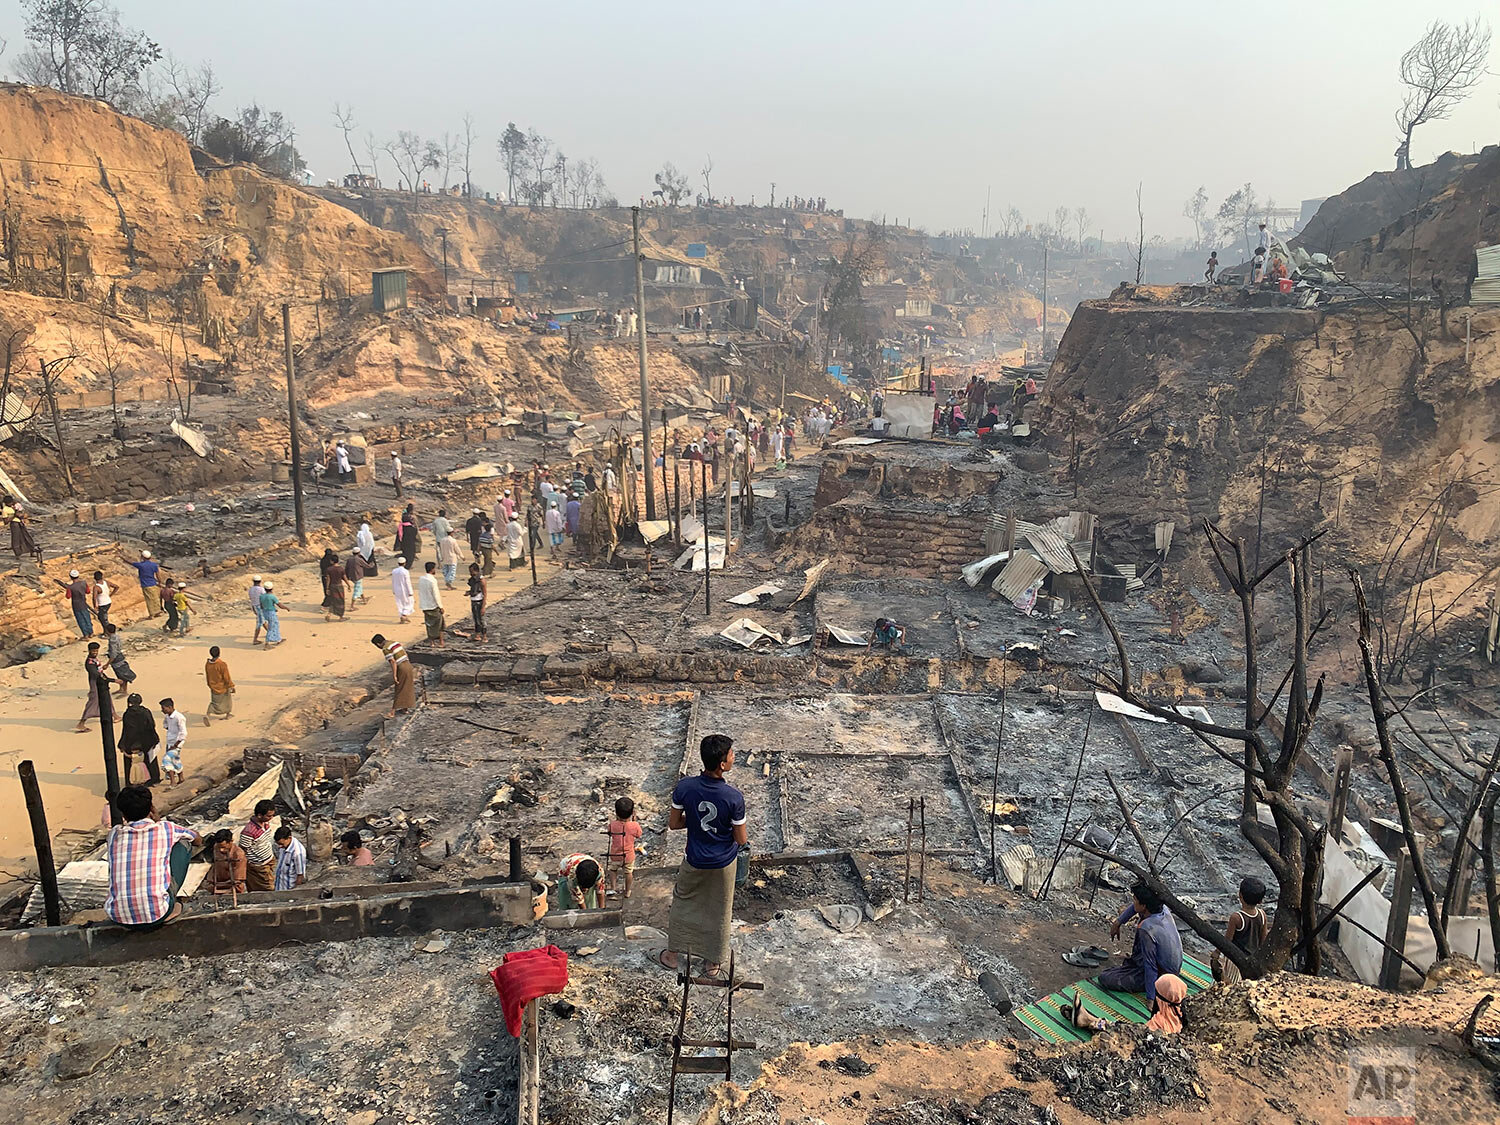  Rohingya refugees look at the remains of Monday's fire at the Rohingya refugee camp in Balukhali, southern Bangladesh, Tuesday, March 23, 2021. (AP Photo/ Shafiqur Rahman) 